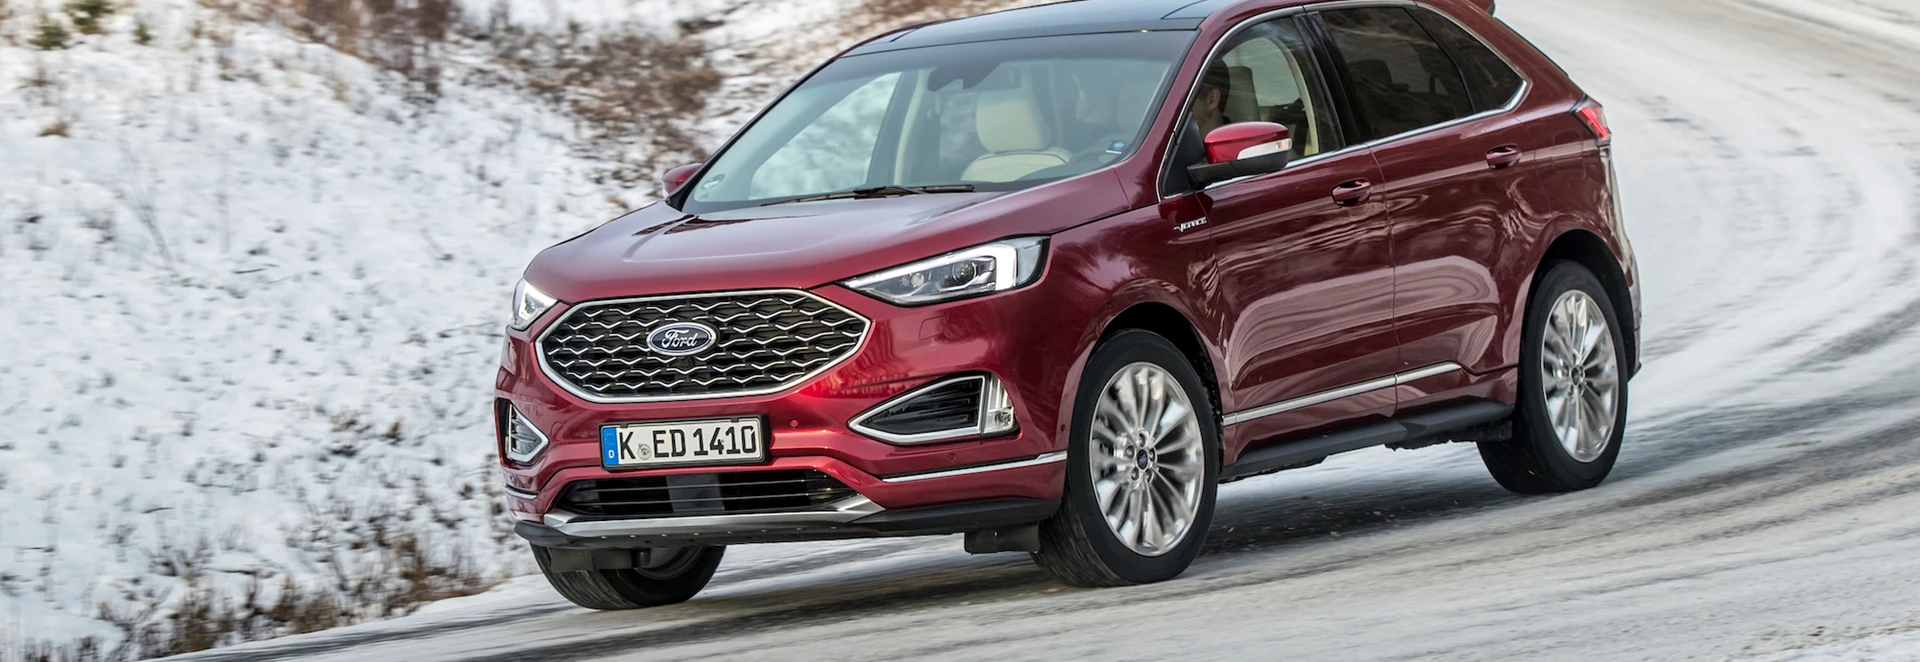 2019 Ford Edge review